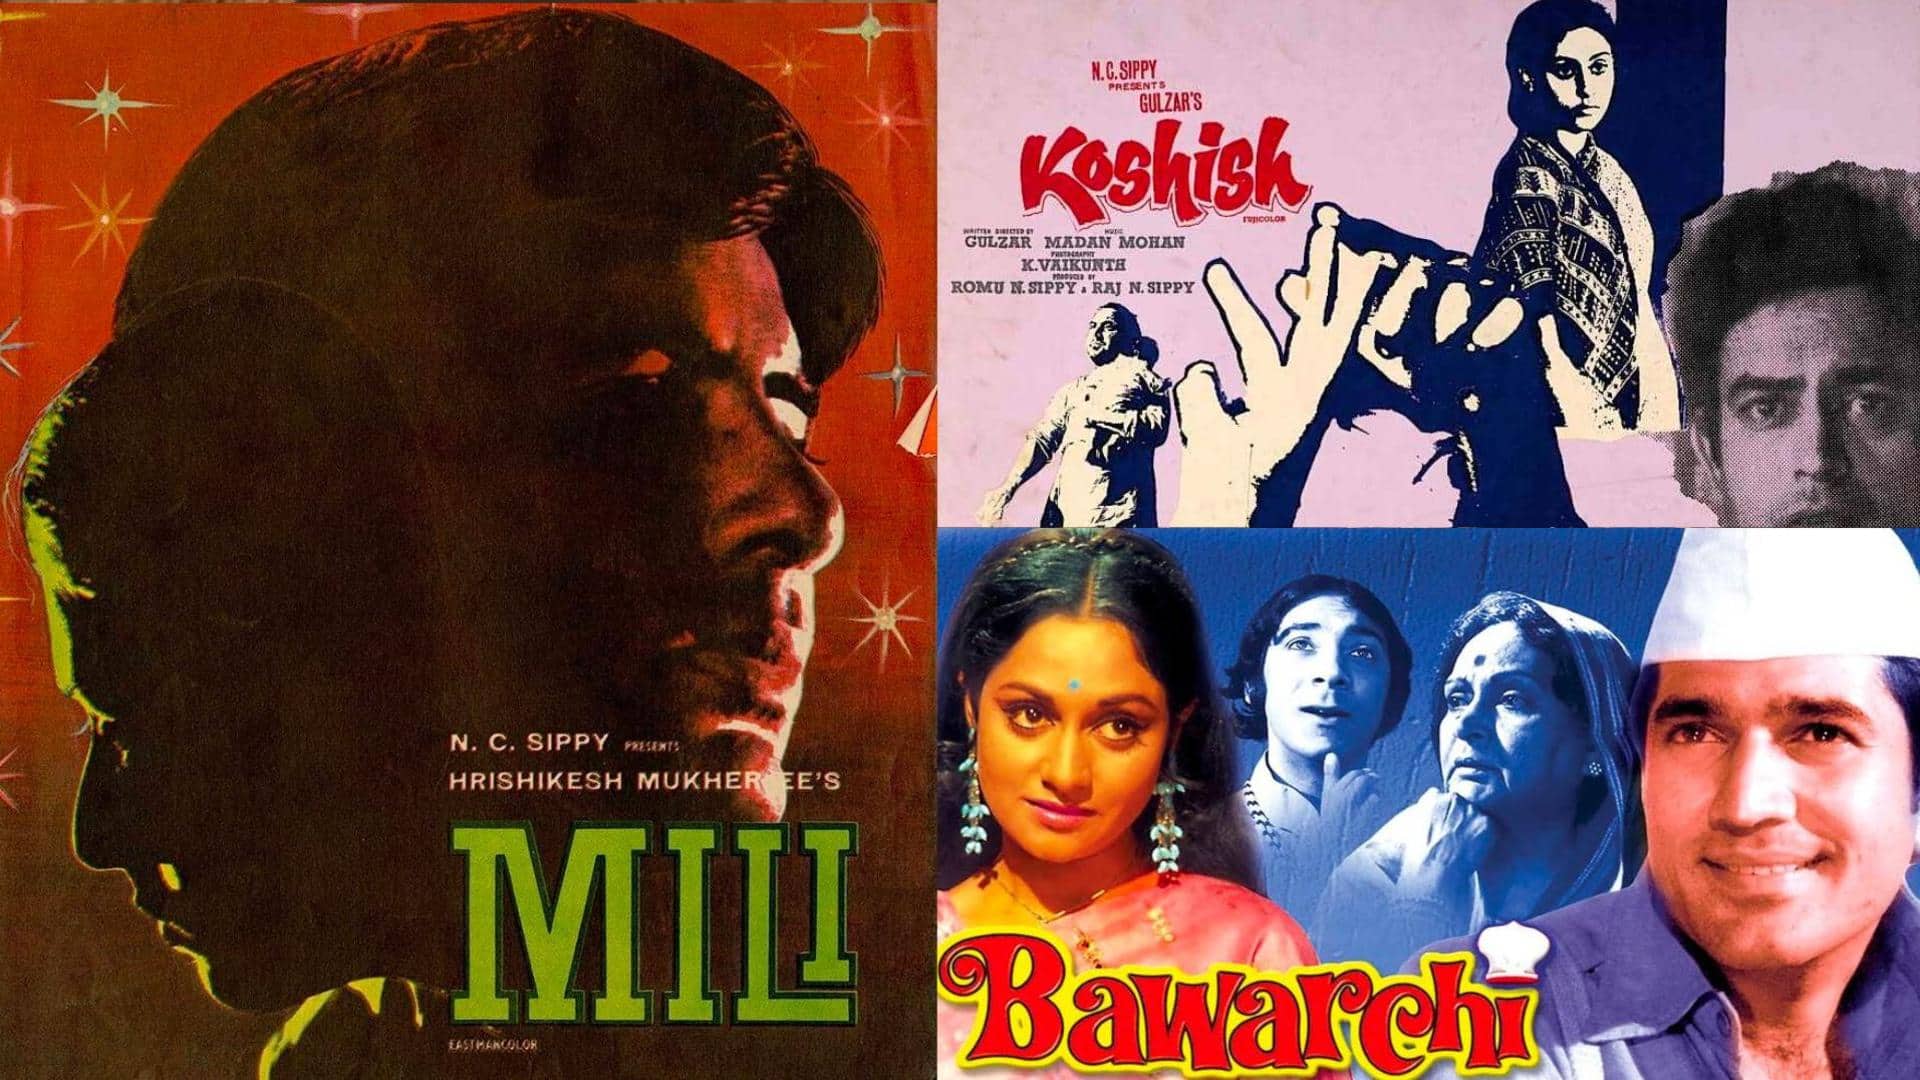 'Mili,' 'Koshish,' Bawarchi': Classic films set to receive contemporary remakes